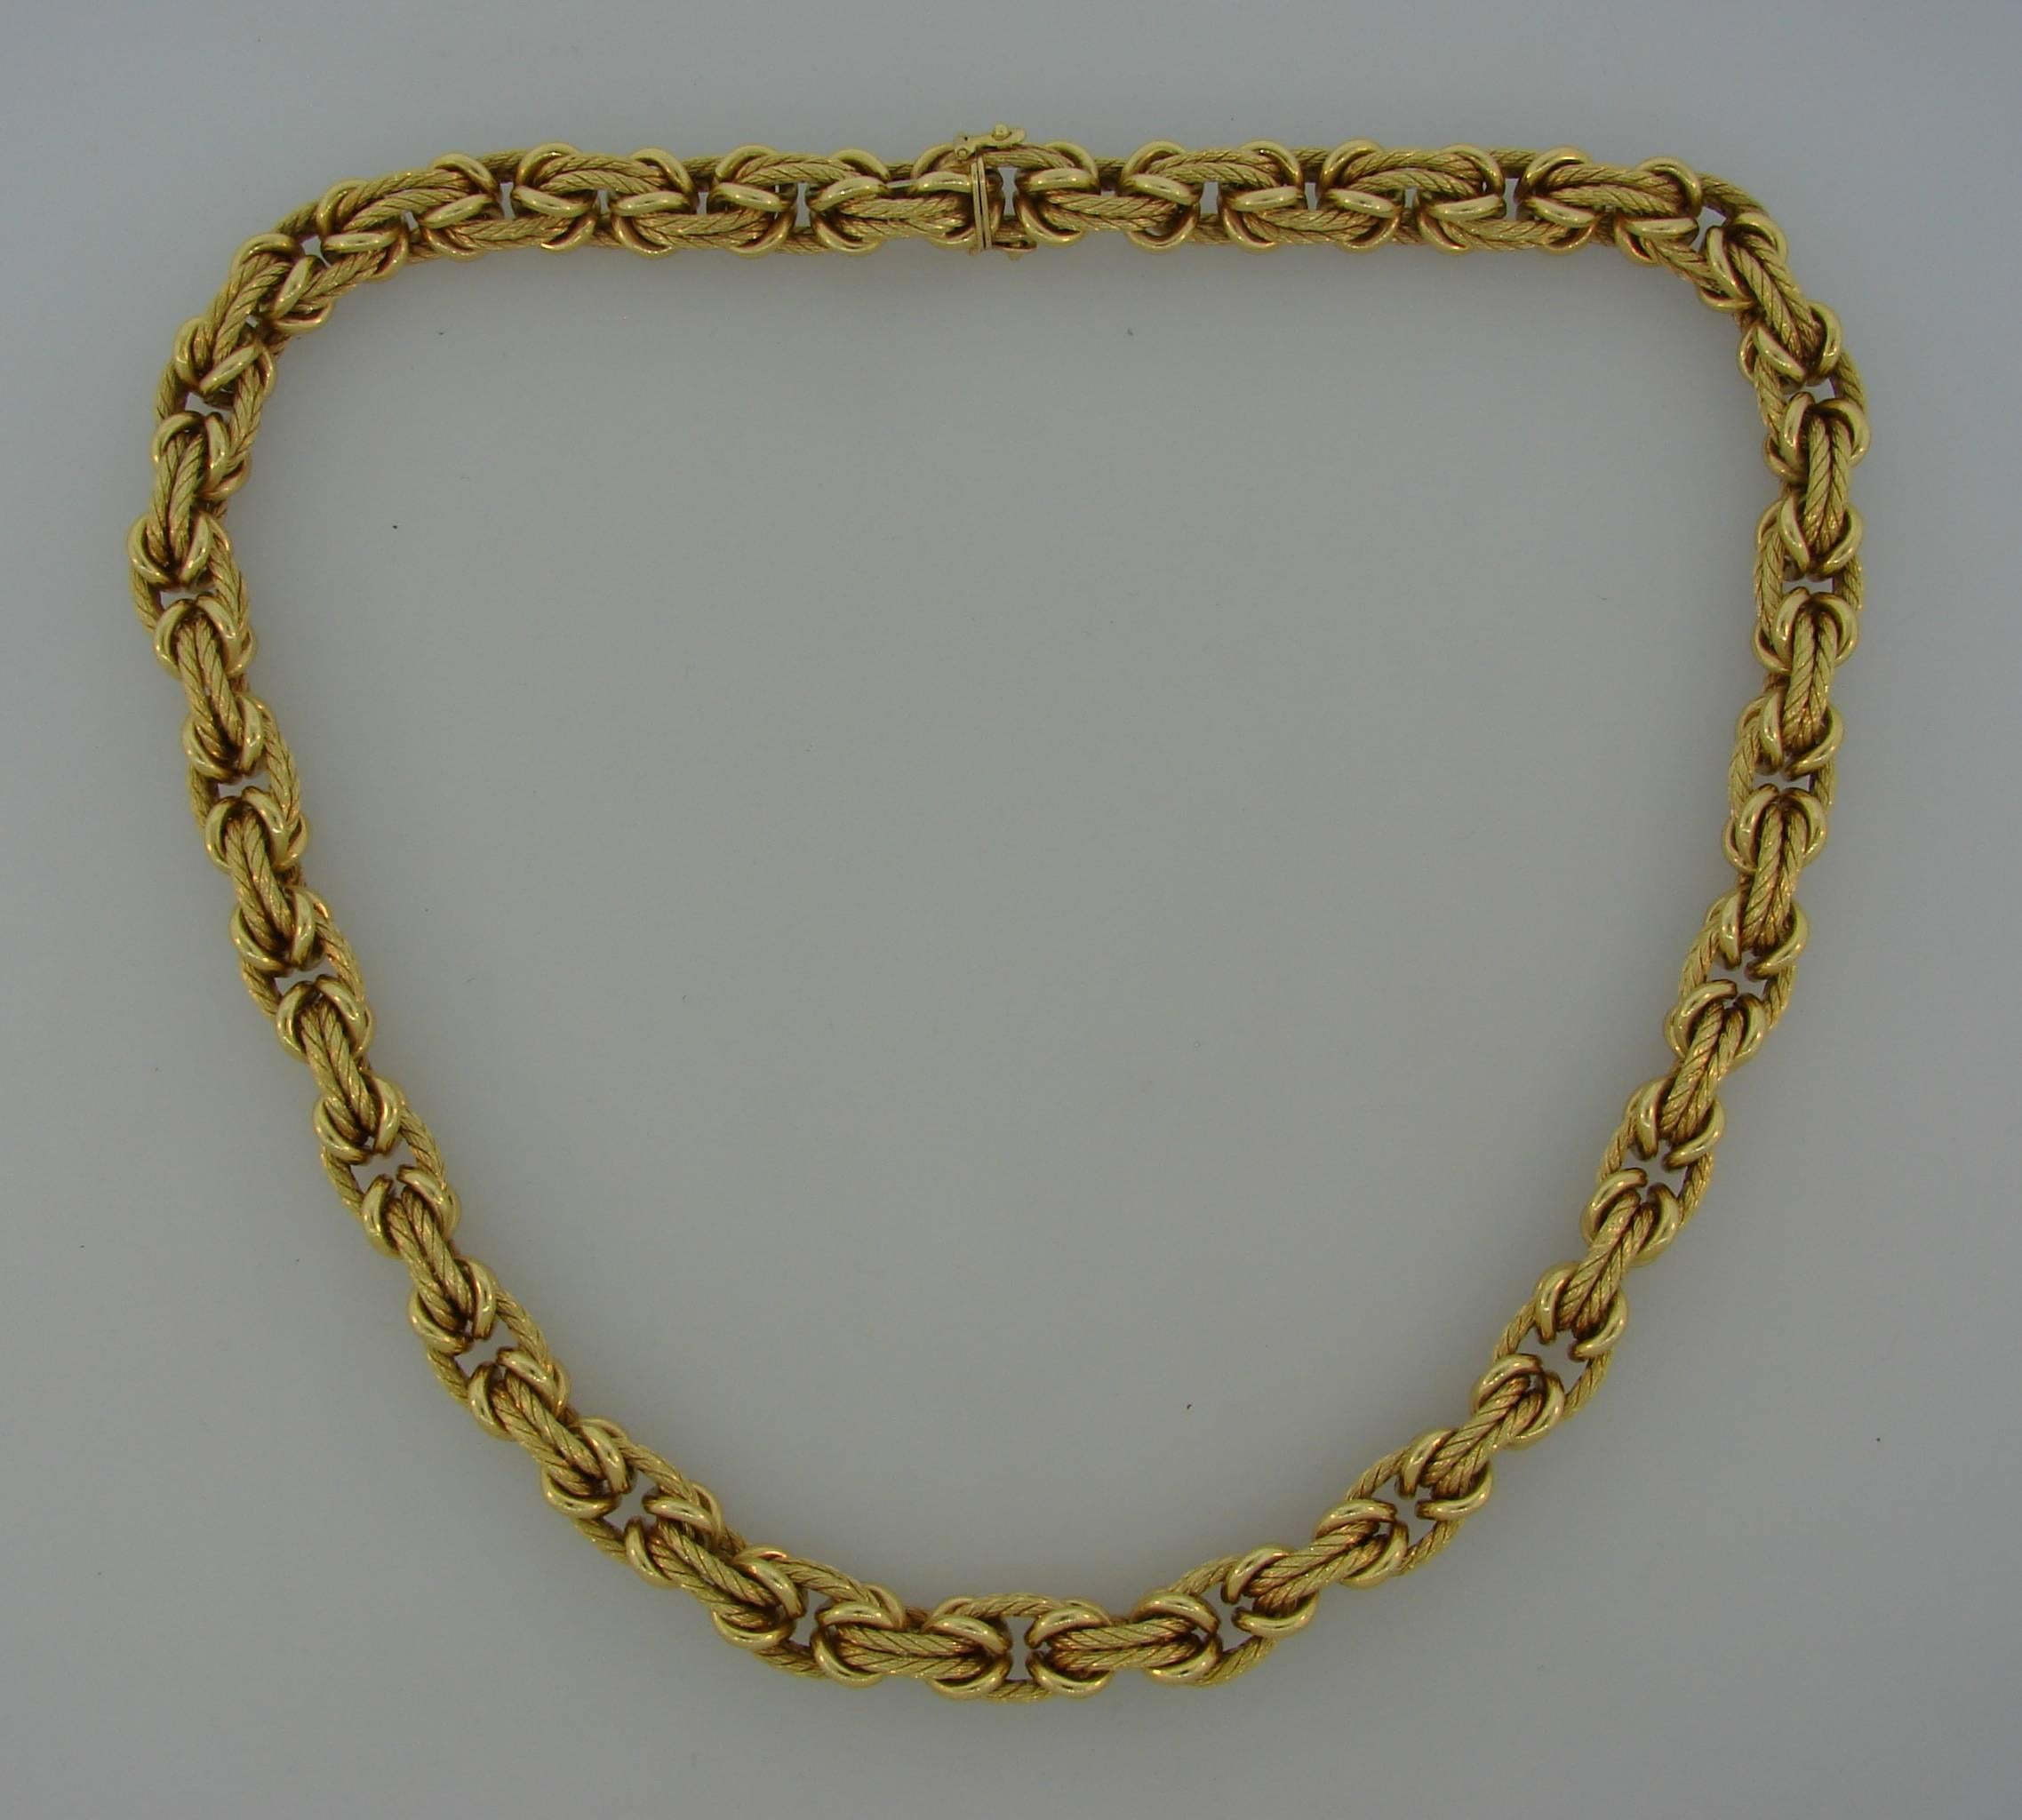 Chic and stylish rope chain necklace created by Van Cleef & Arpels in the 1970's. Beautifully designed links, a tasteful combination of high polished and textured gold and volume are the highlights of this necklace. The chain is different and